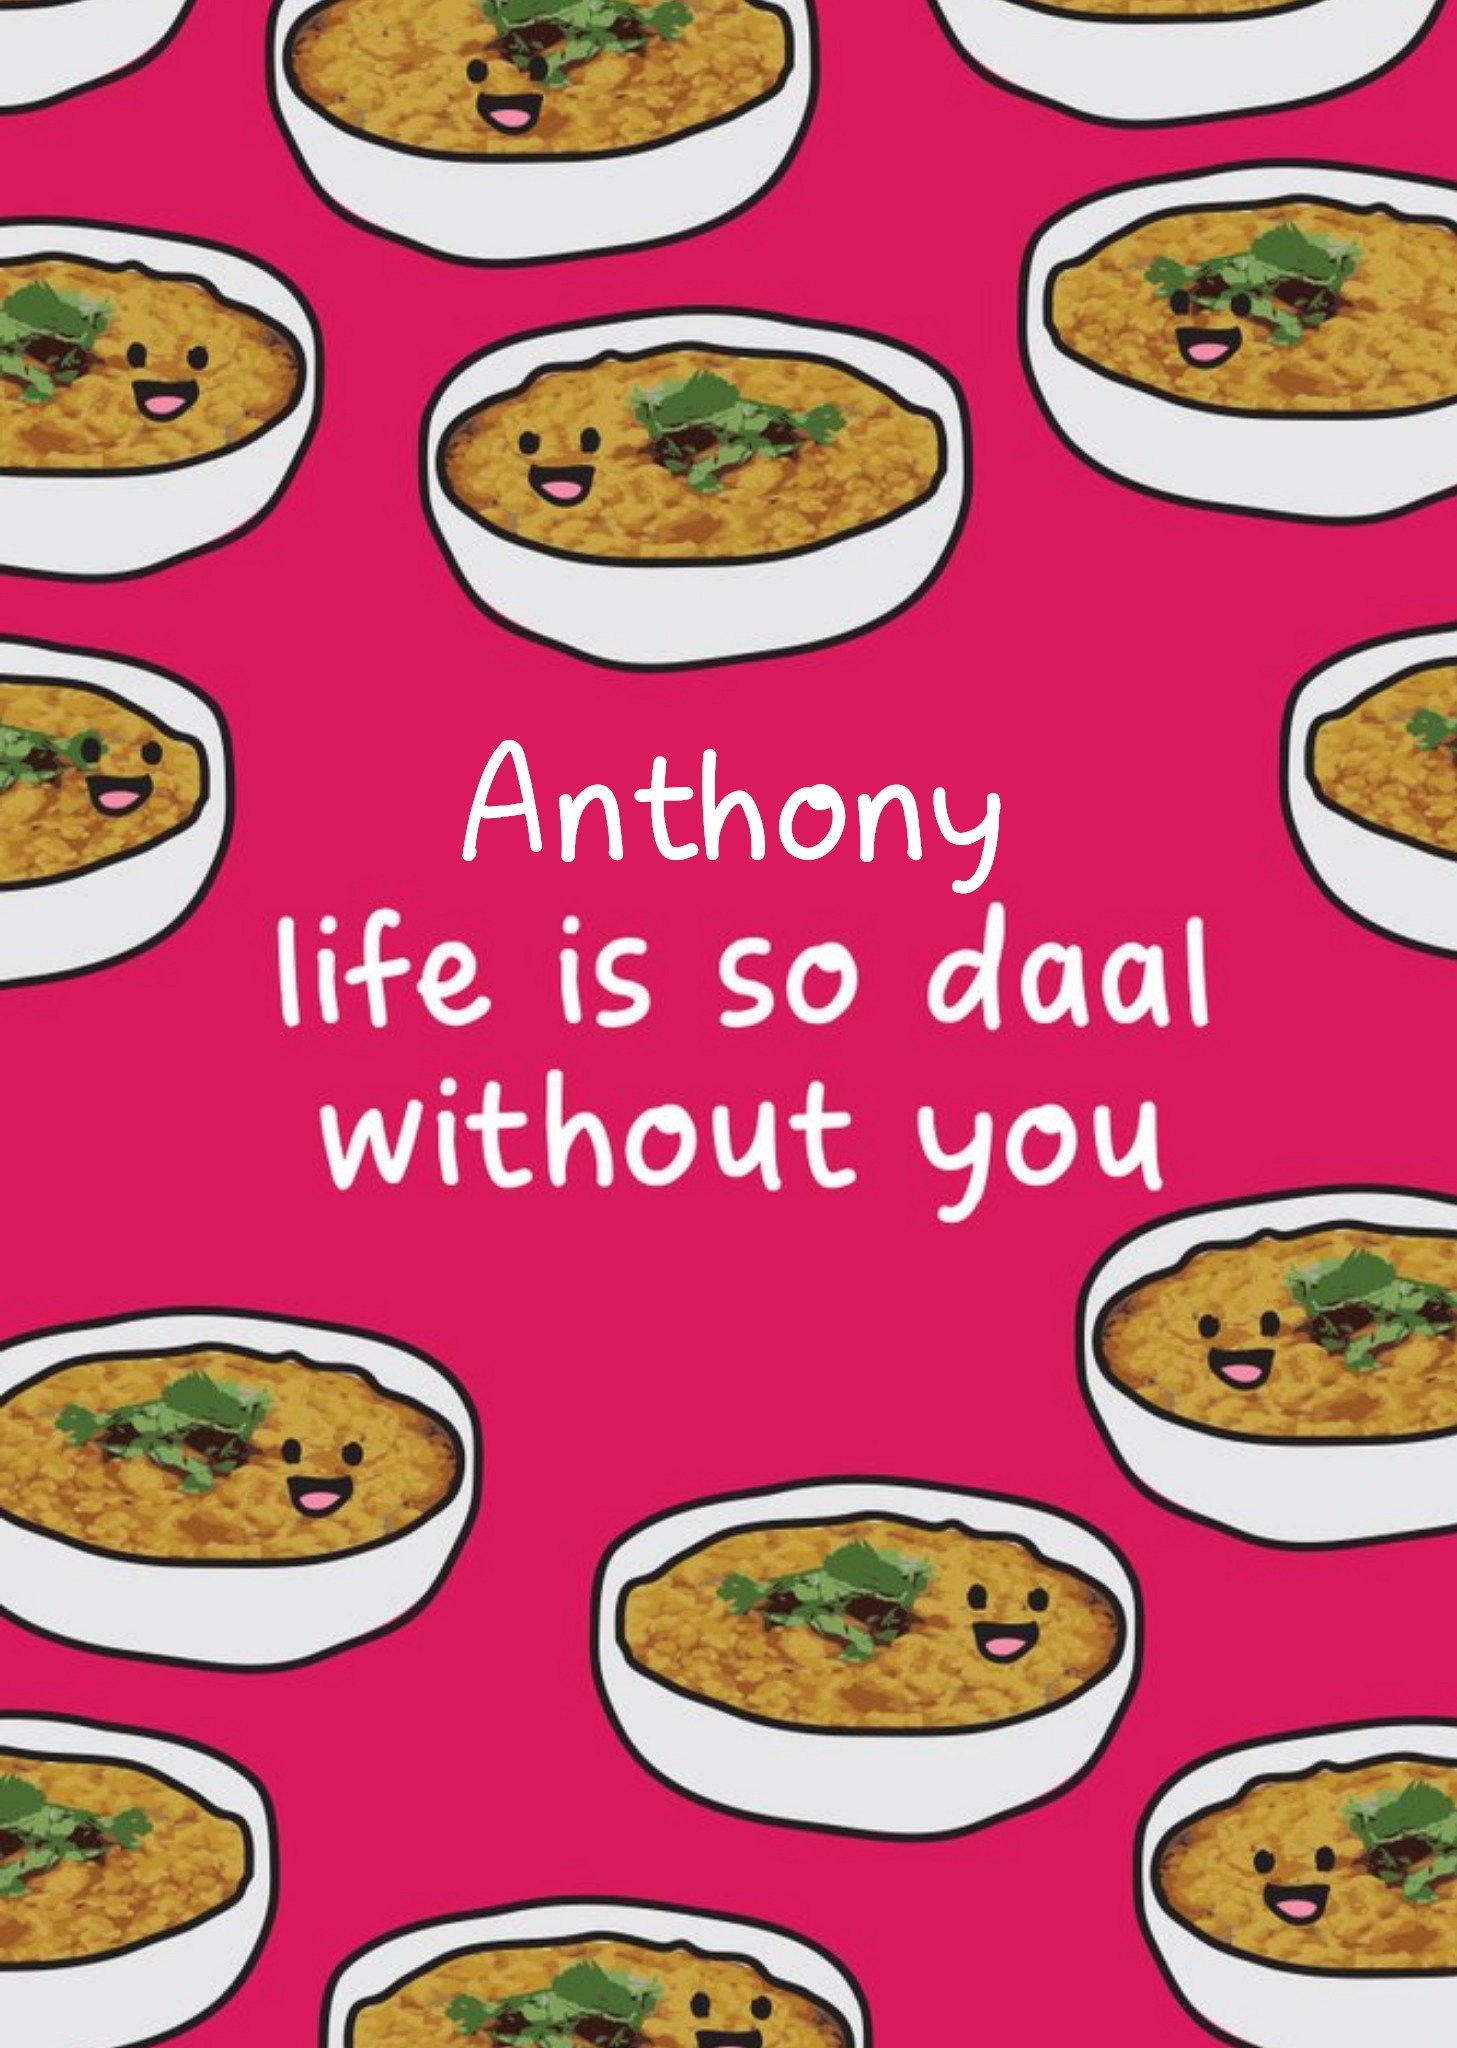 Moonpig Illustrated Bowls Of Daal. Life Is So Daal Without You Birthday Card, Large